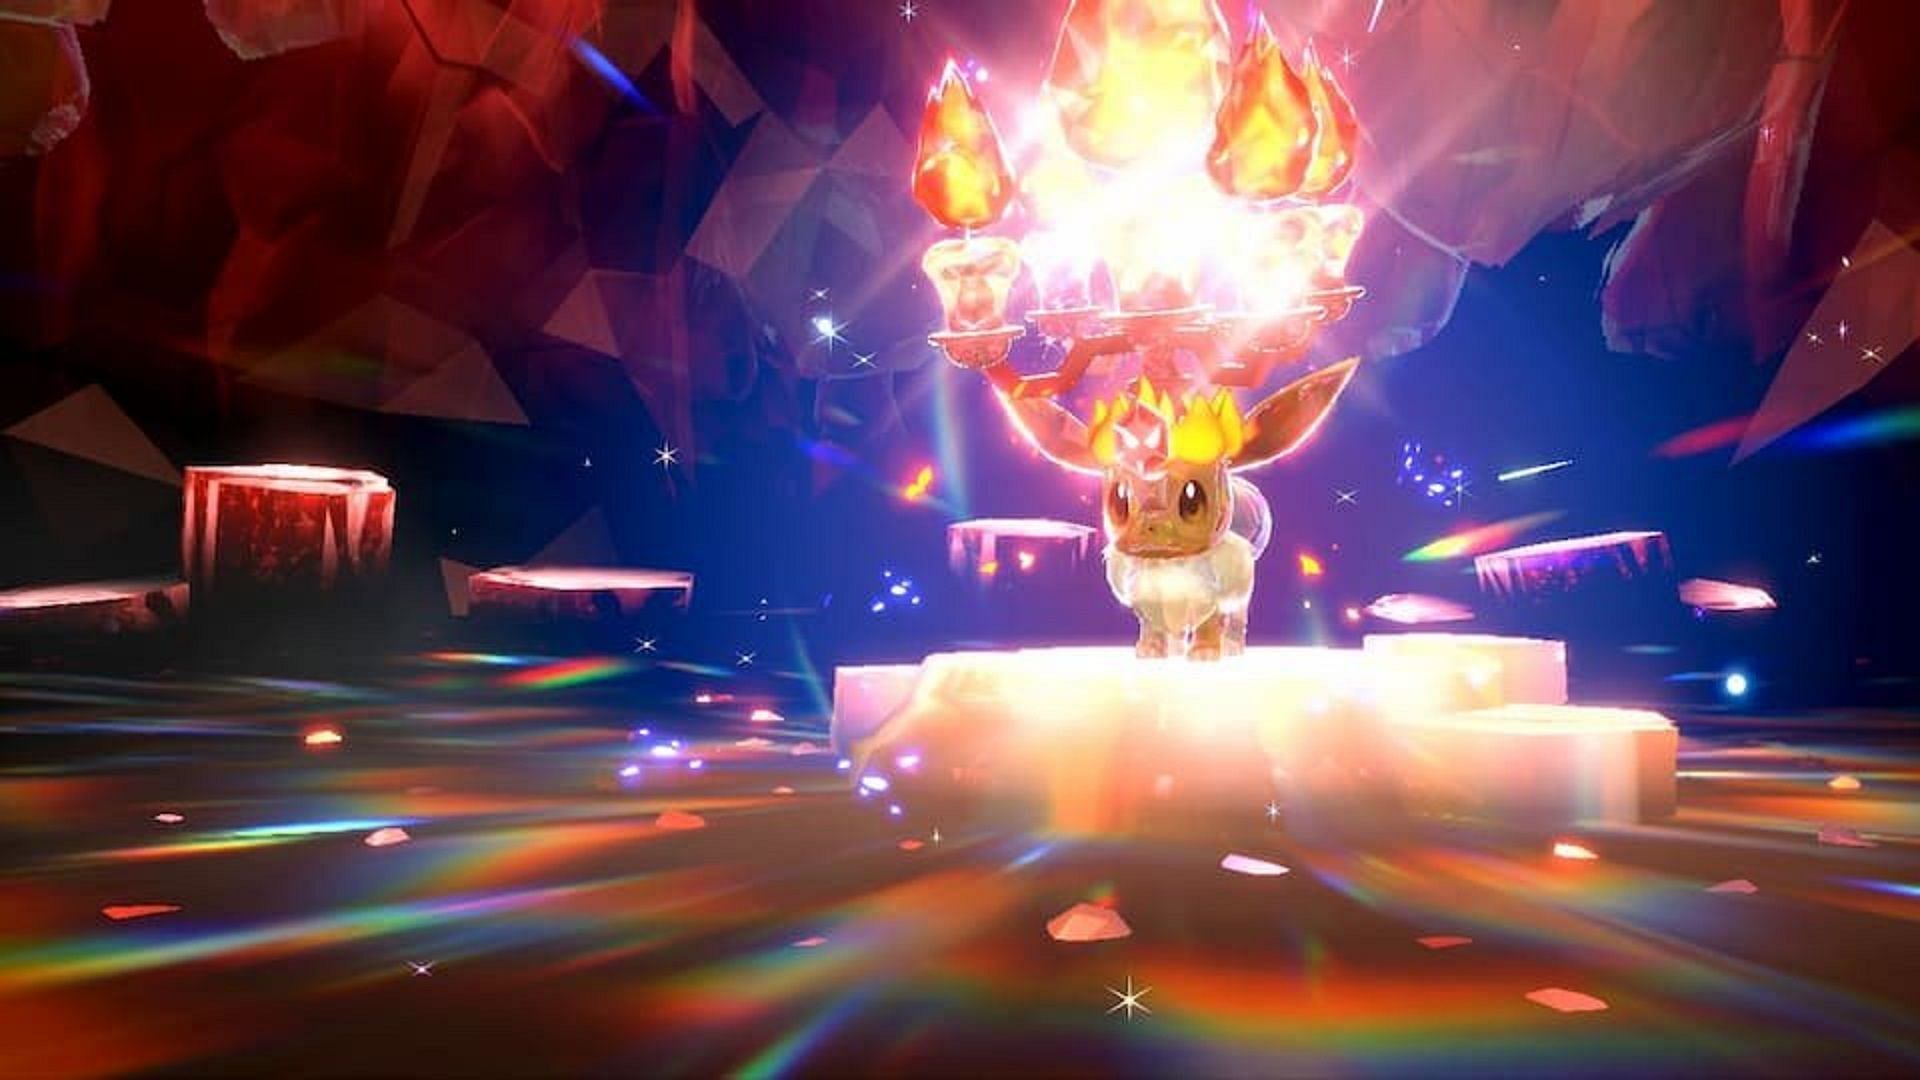 Eevee appears to be the first Tera Raid Boss in Pokemon Scarlet and Violet